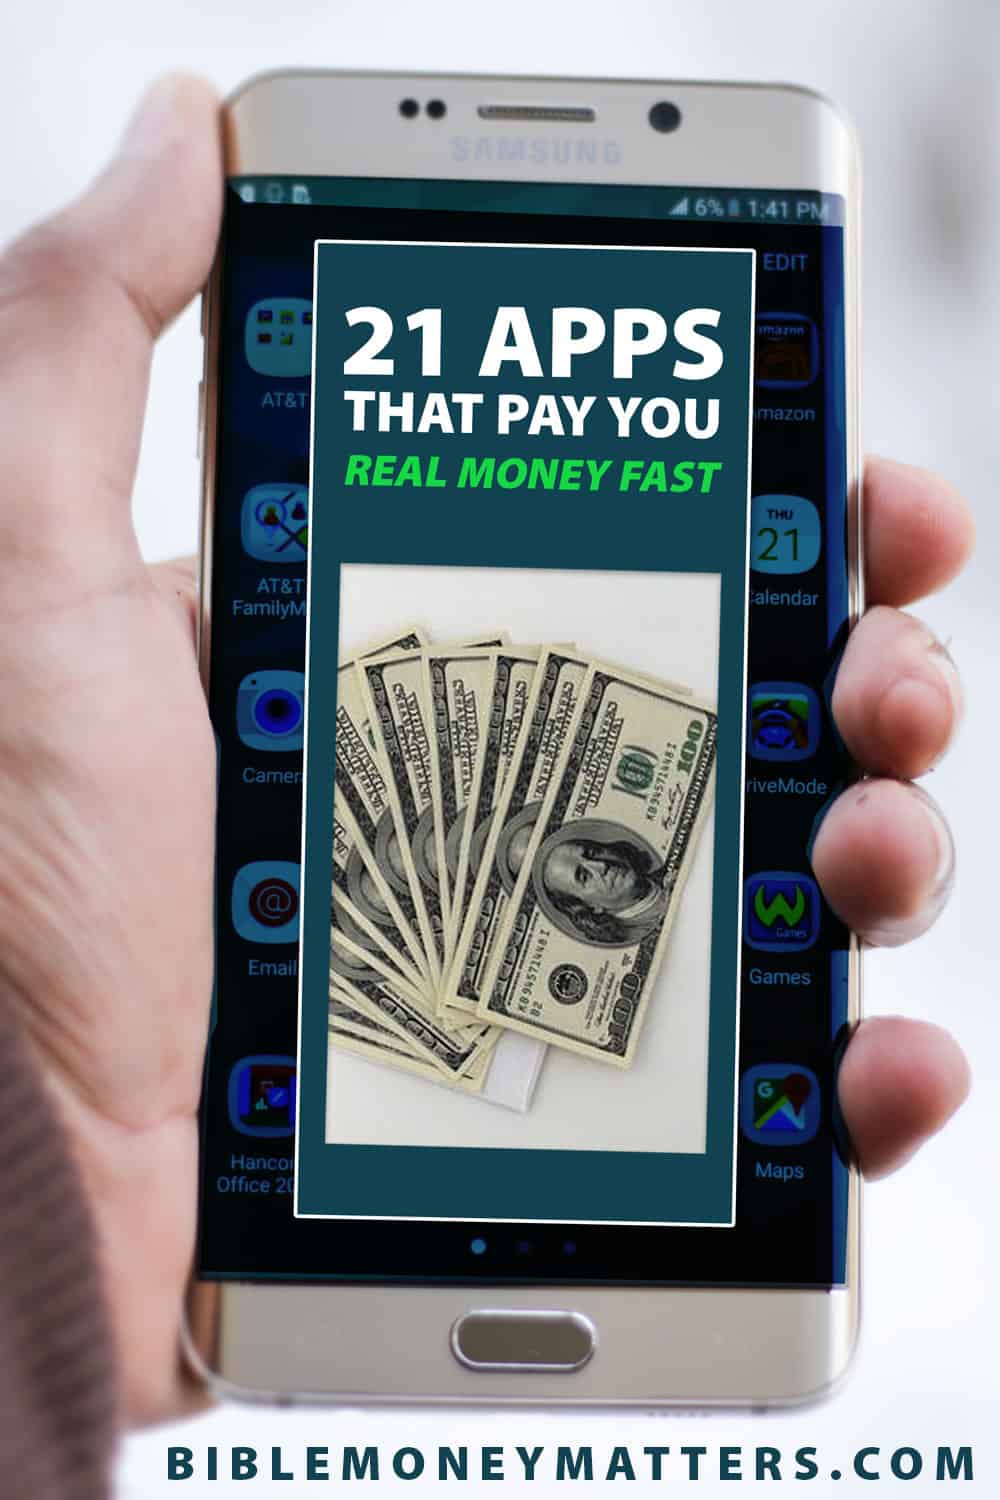 real casino apps that pay real money